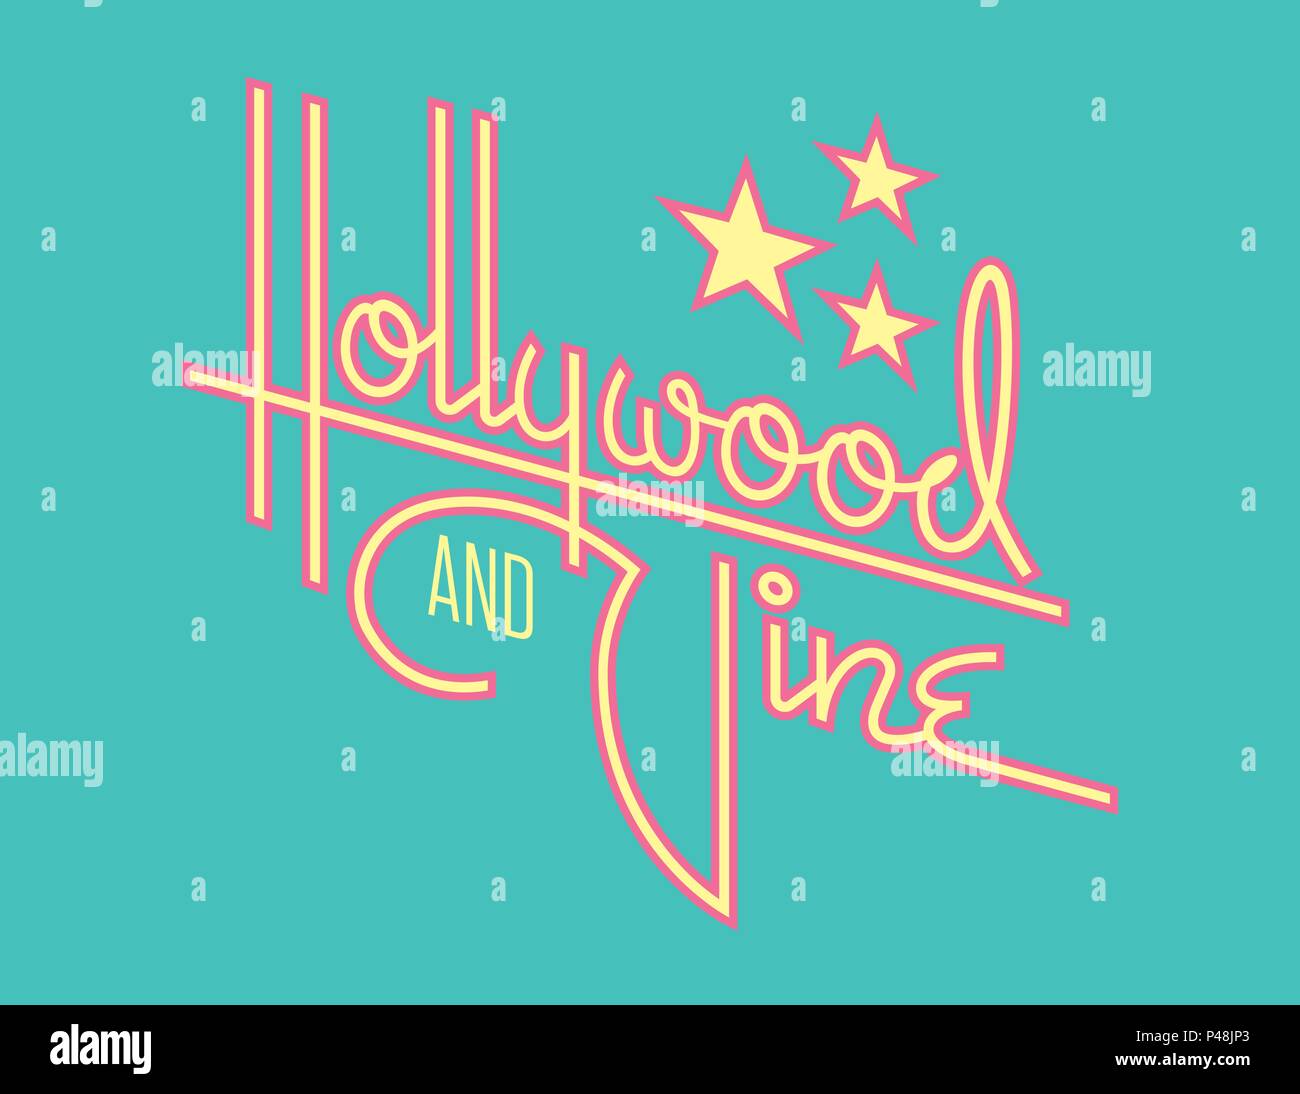 Hollywood Retro Vector Design with Stars. Custom hand drawn script design of the word Hollywood with retro 1950s style vibe. Stock Vector